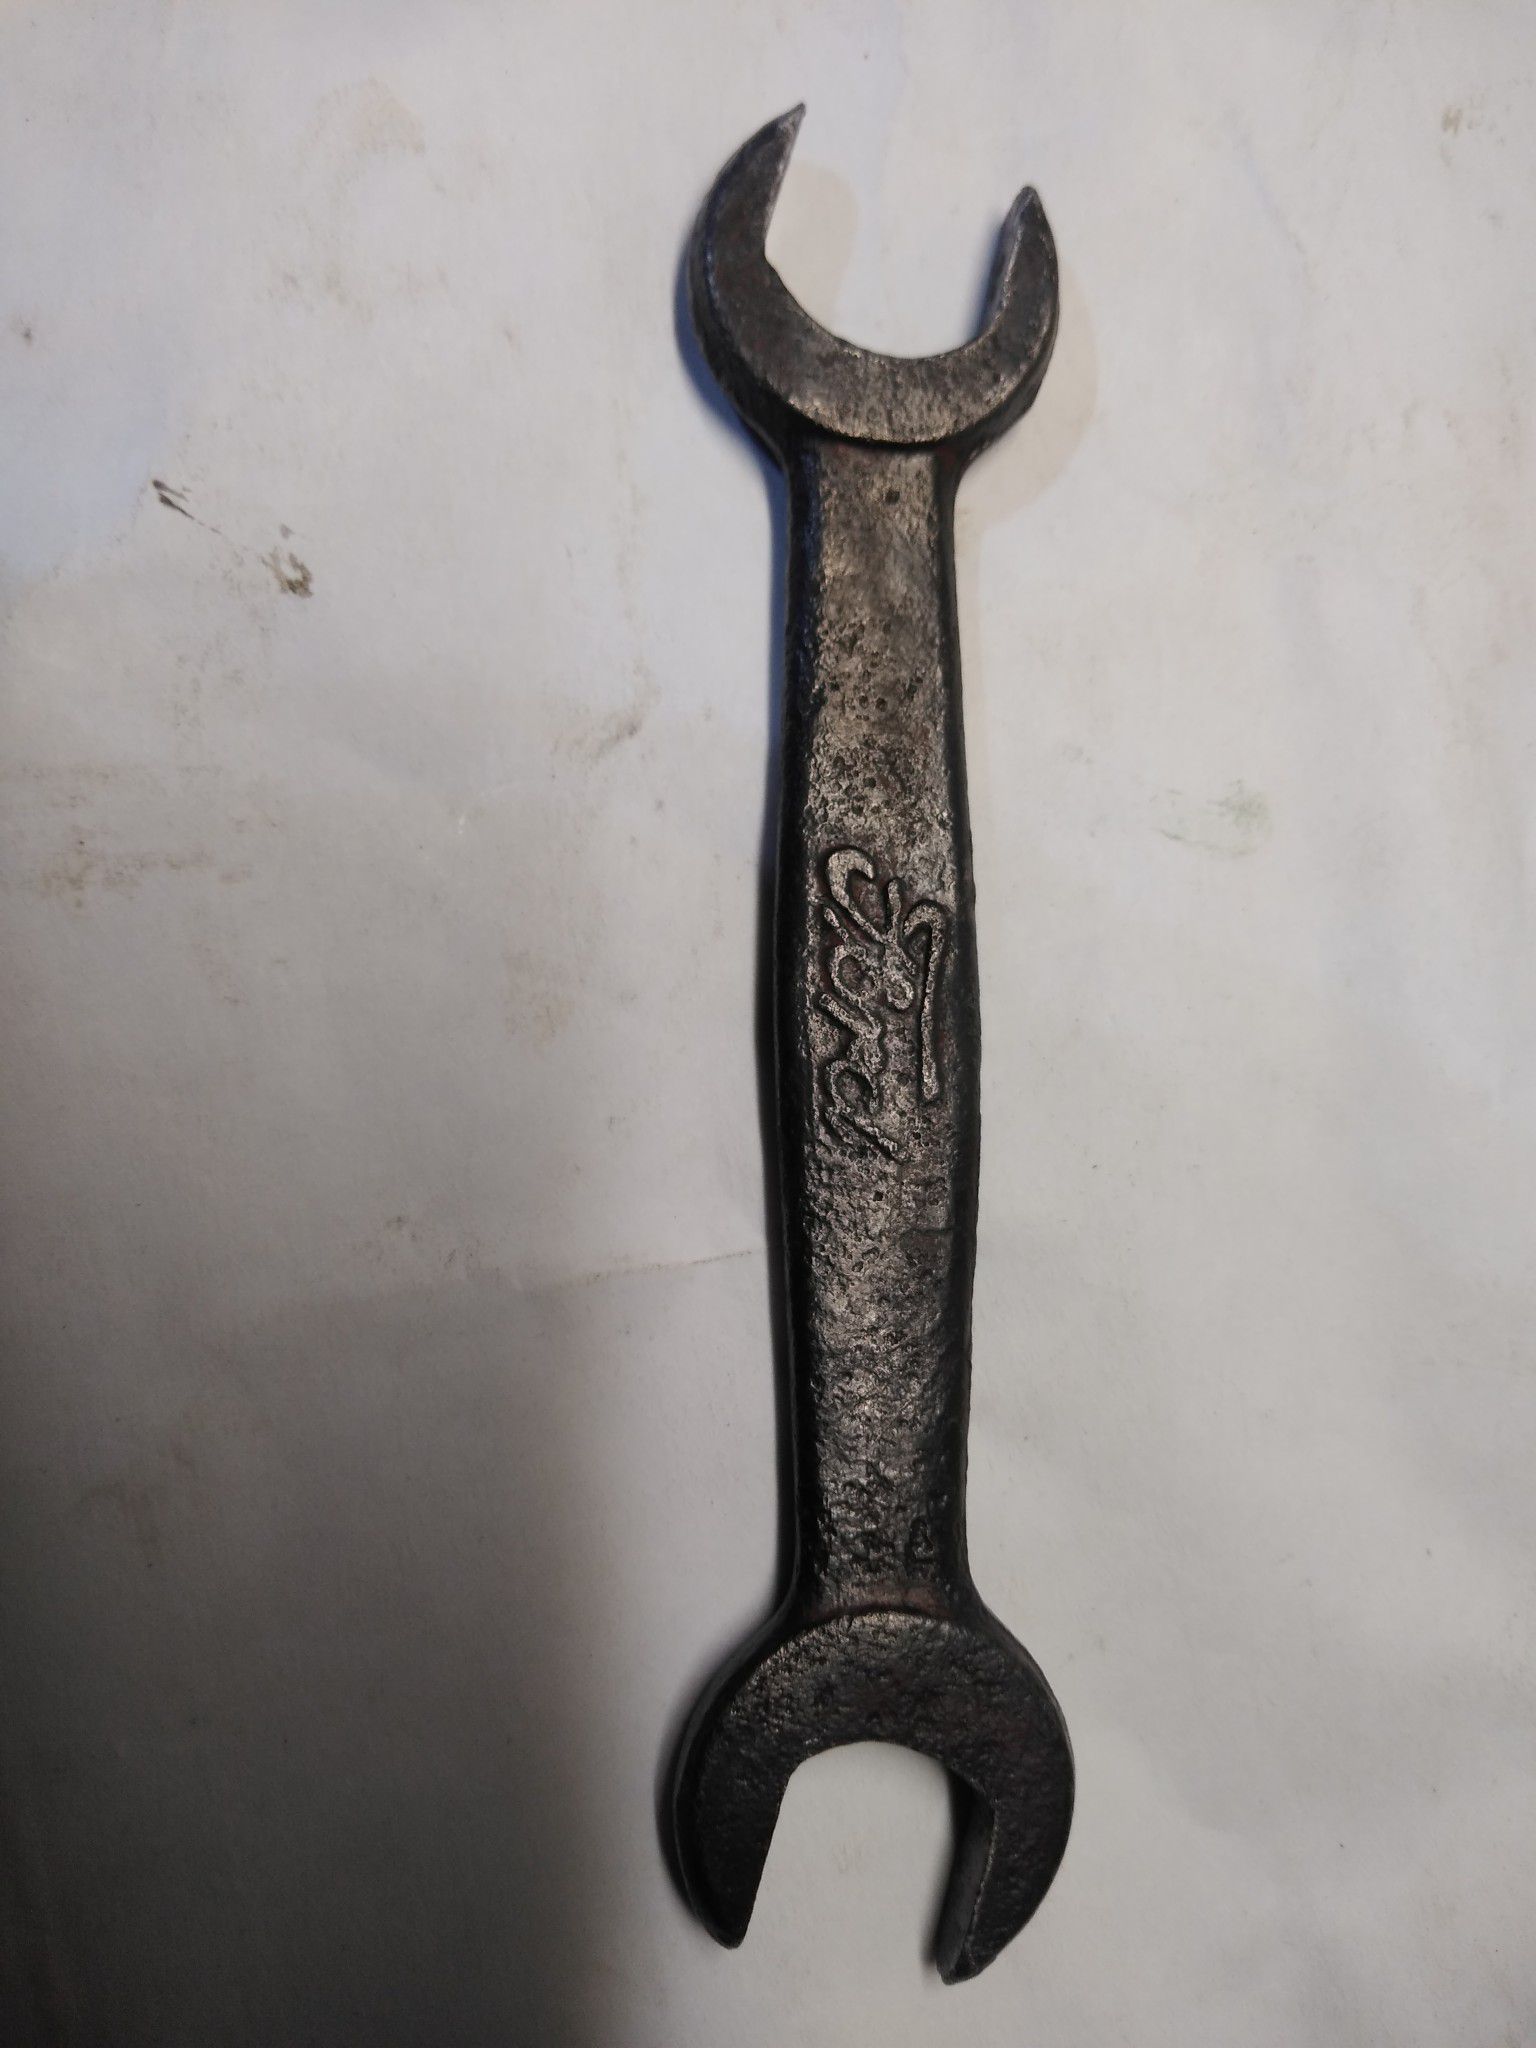 Vintage Ford wrench 1917, model t.